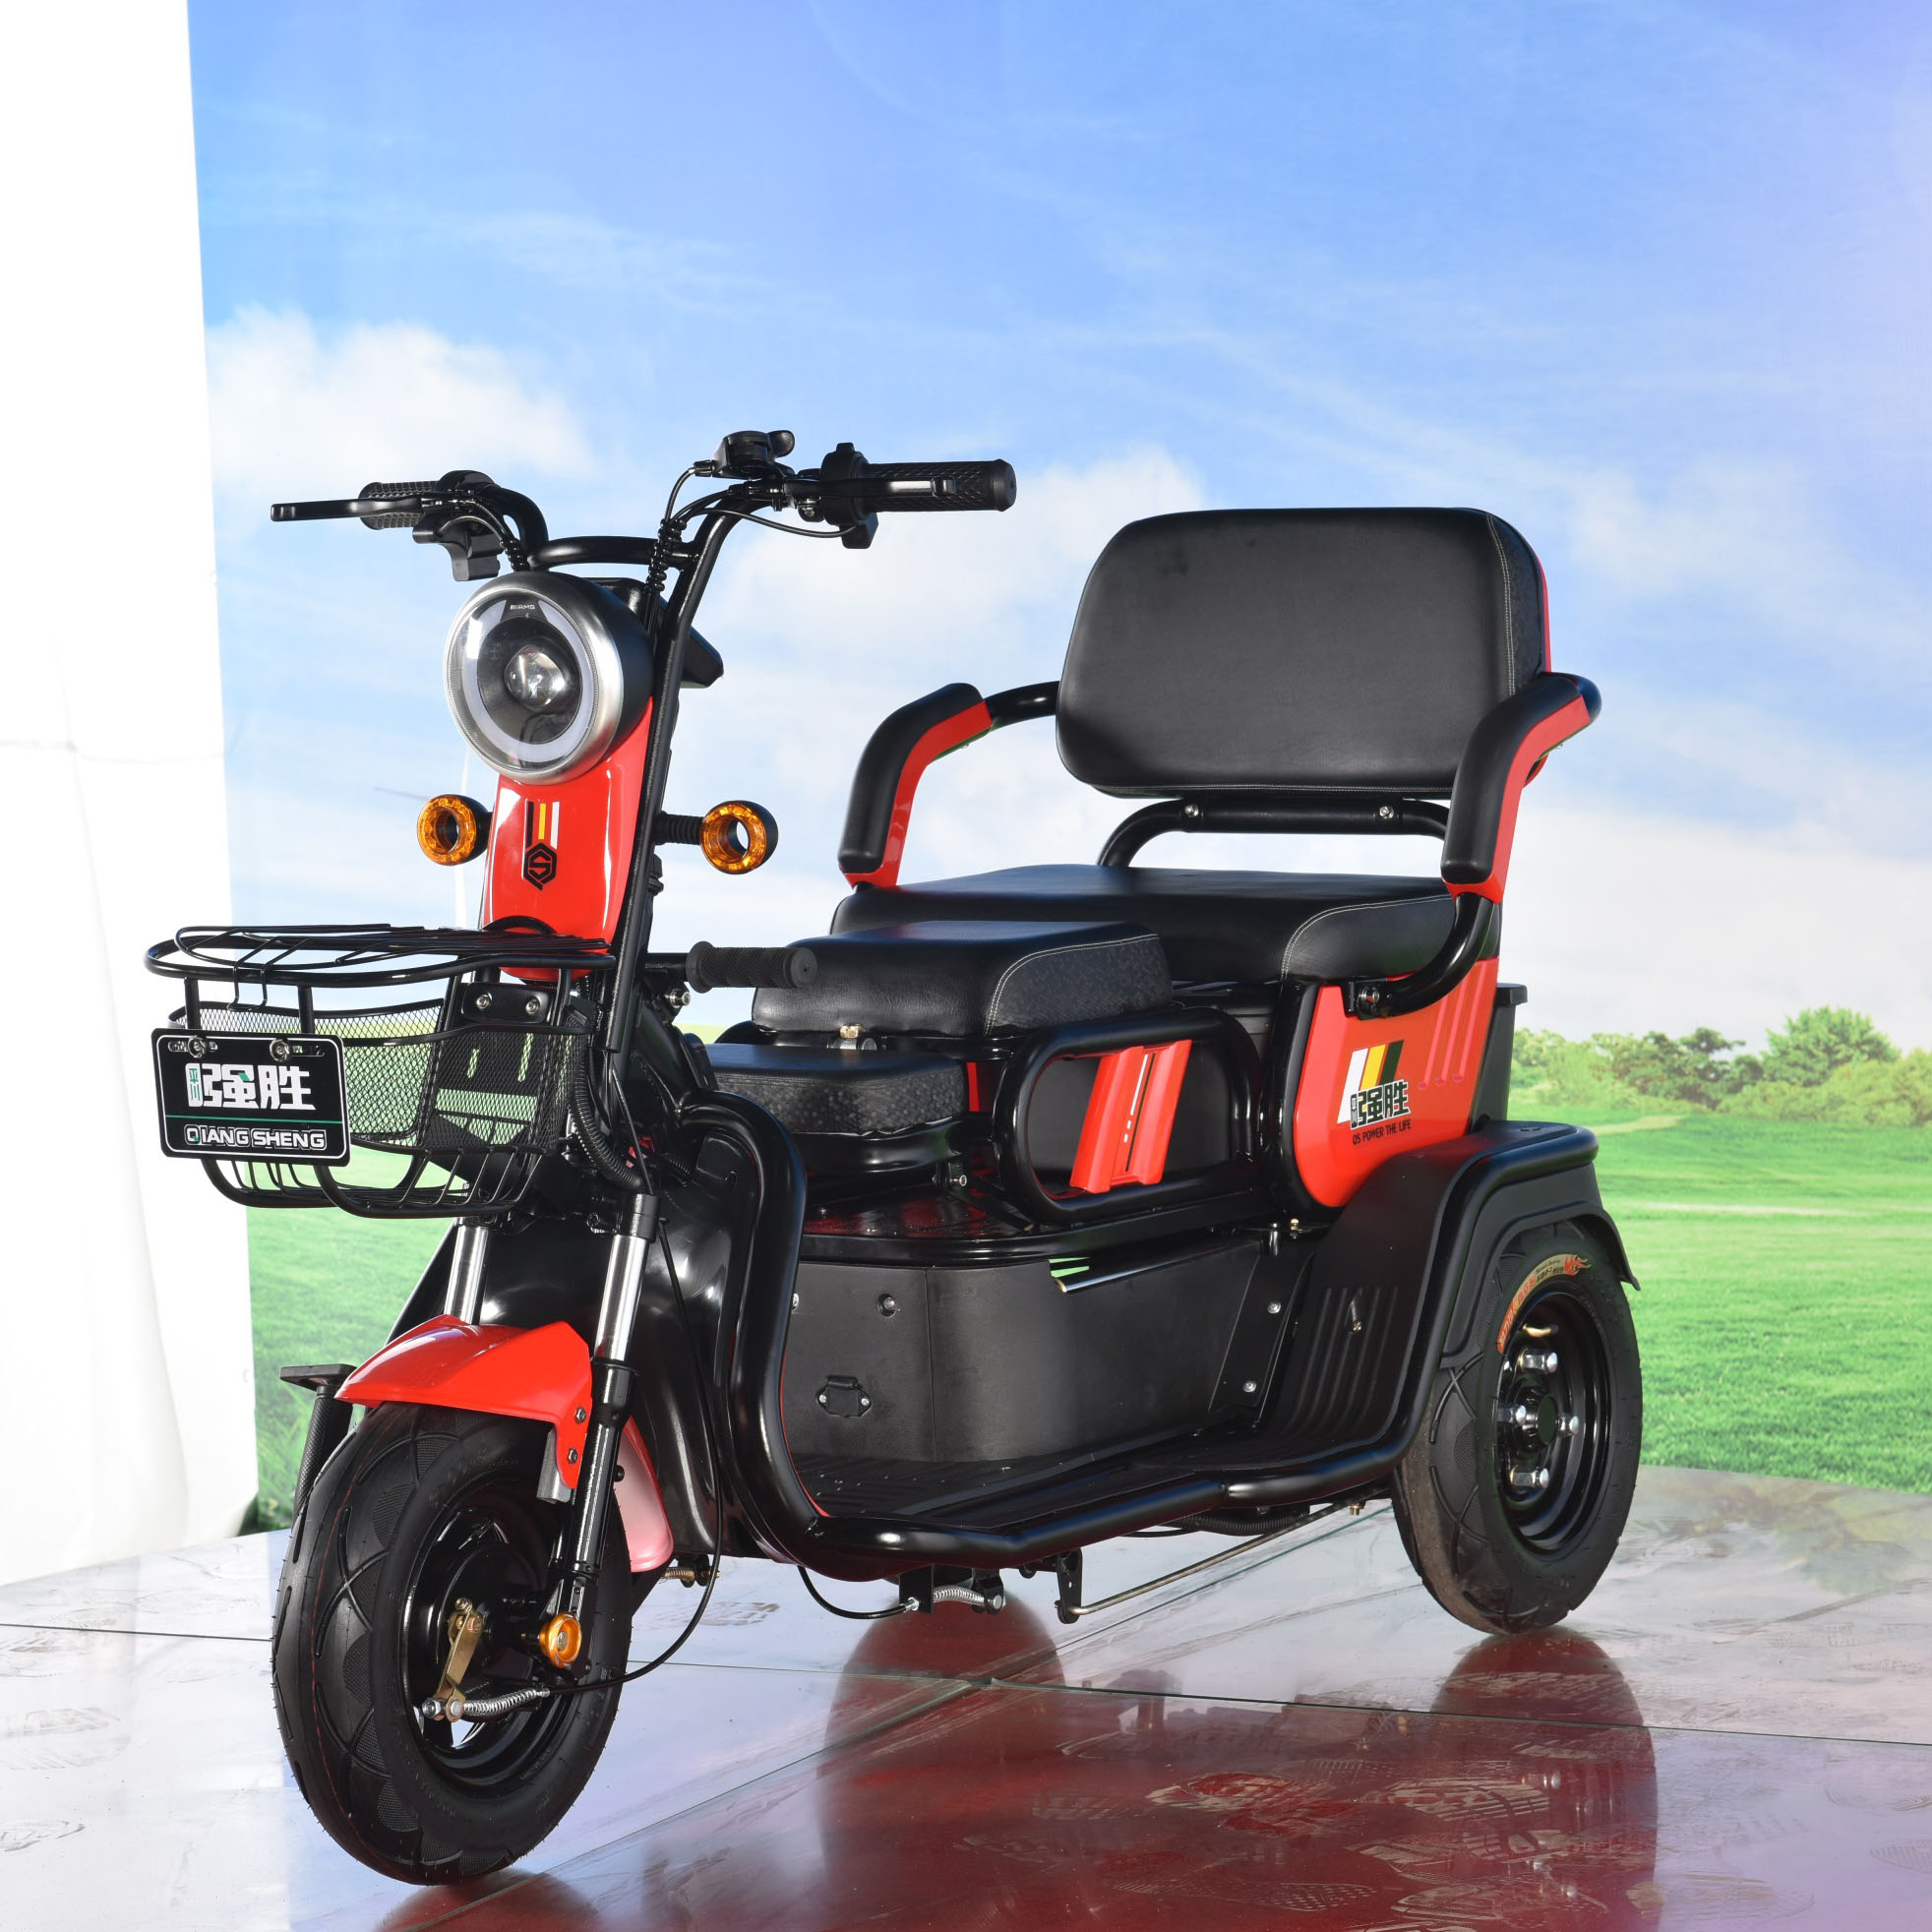 2022 City sightseeing electric bike for three wheel  fashion style electric scooter on sale hot sale 500w electric rickshaw